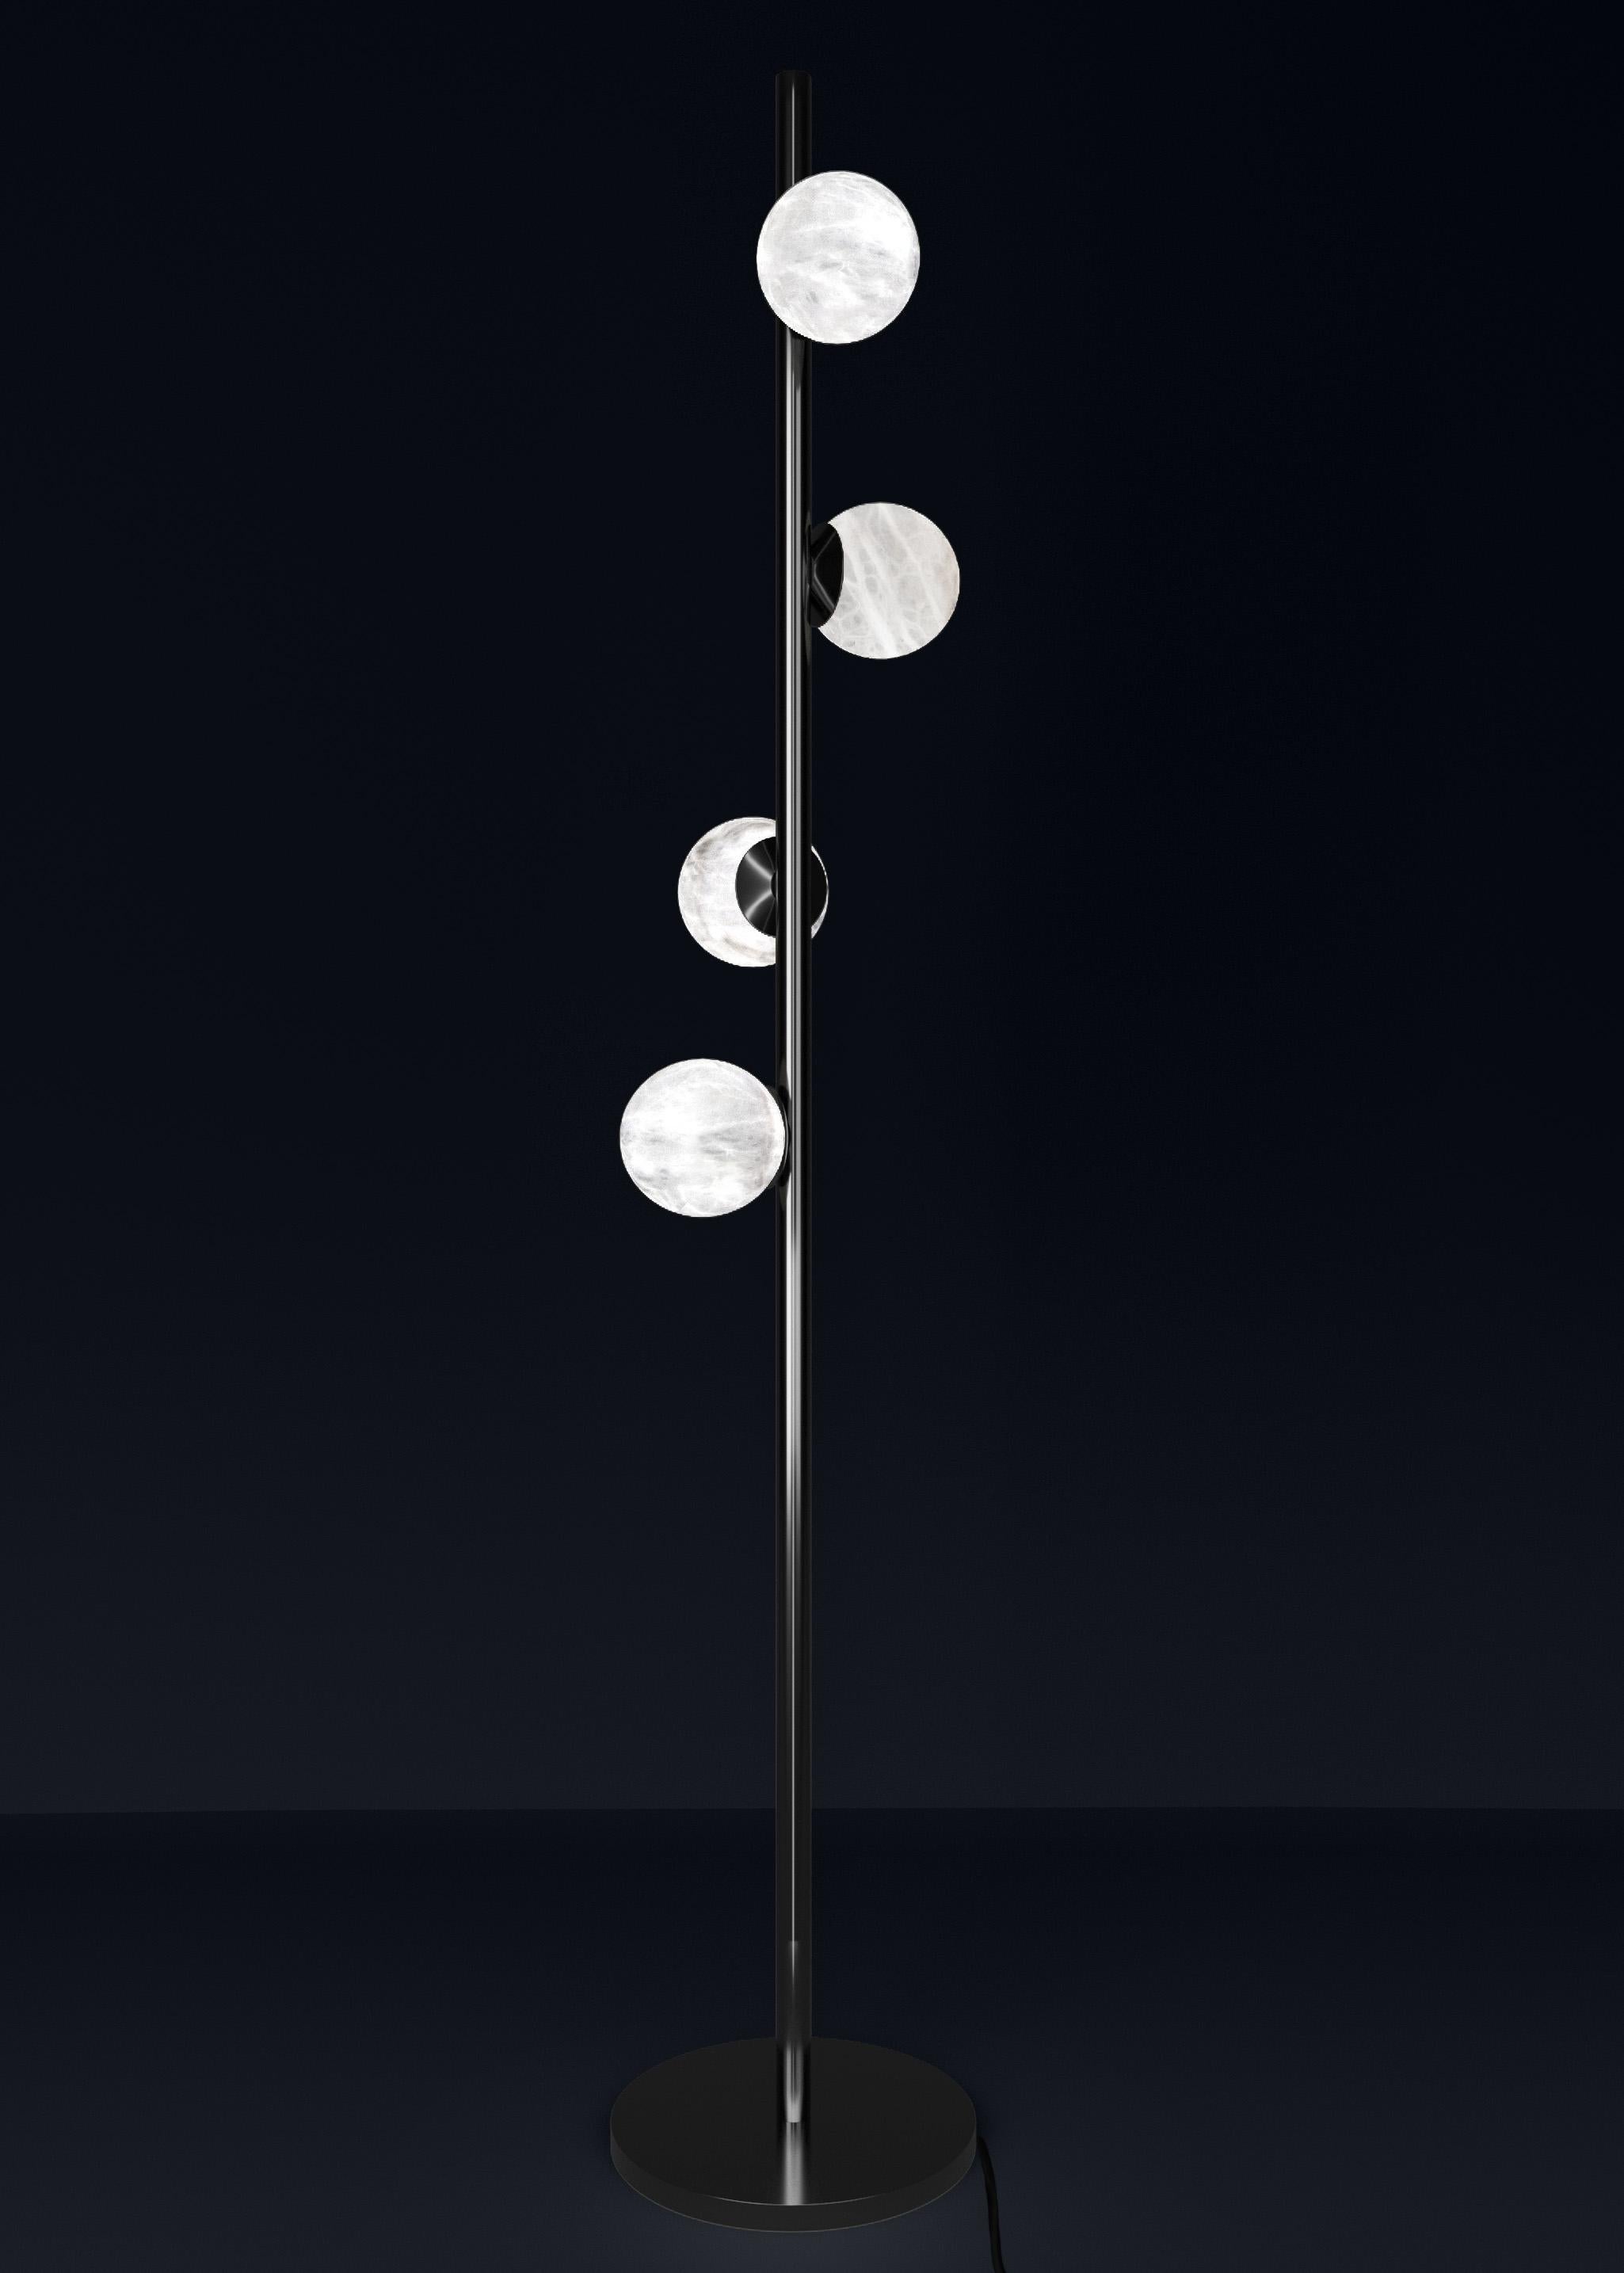 Ofione Shiny Black Metal Floor Lamp by Alabastro Italiano
Dimensions: D 50 x W 50 x H 170 cm.
Materials: White alabaster and metal.

Available in different finishes: Shiny Silver, Bronze, Brushed Brass, Matte Black, Ruggine of Florence, Brushed